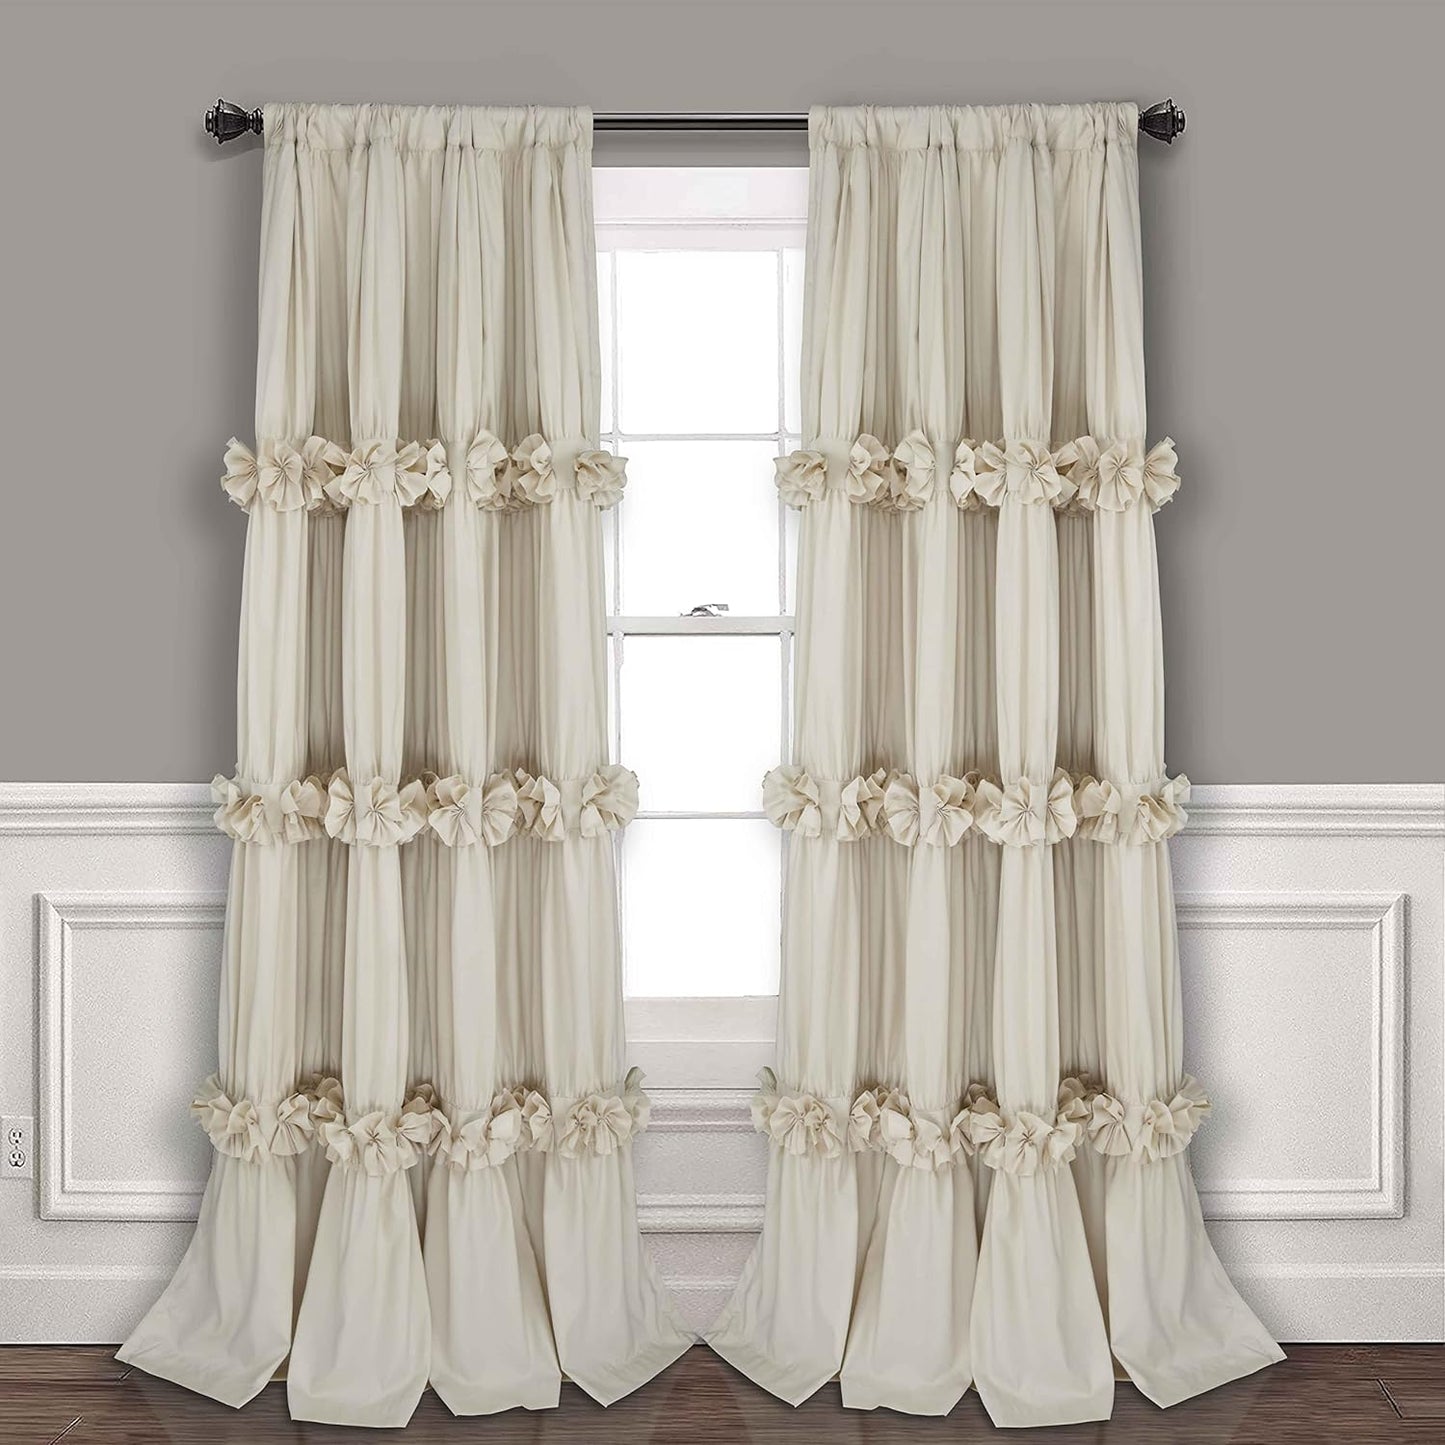 Homechoice Decor Thermal Insulated Blackout Window Curtains, 54" W X 84" L X 2 Panels, Boho Ruched Window Treatments with 3 Rows of Butterfly Flowers, Rustic Rod Pocket Drapes for Room, White (LQ-30)  Homechoice Decor Camel 54" X 84" | 2 Panels 